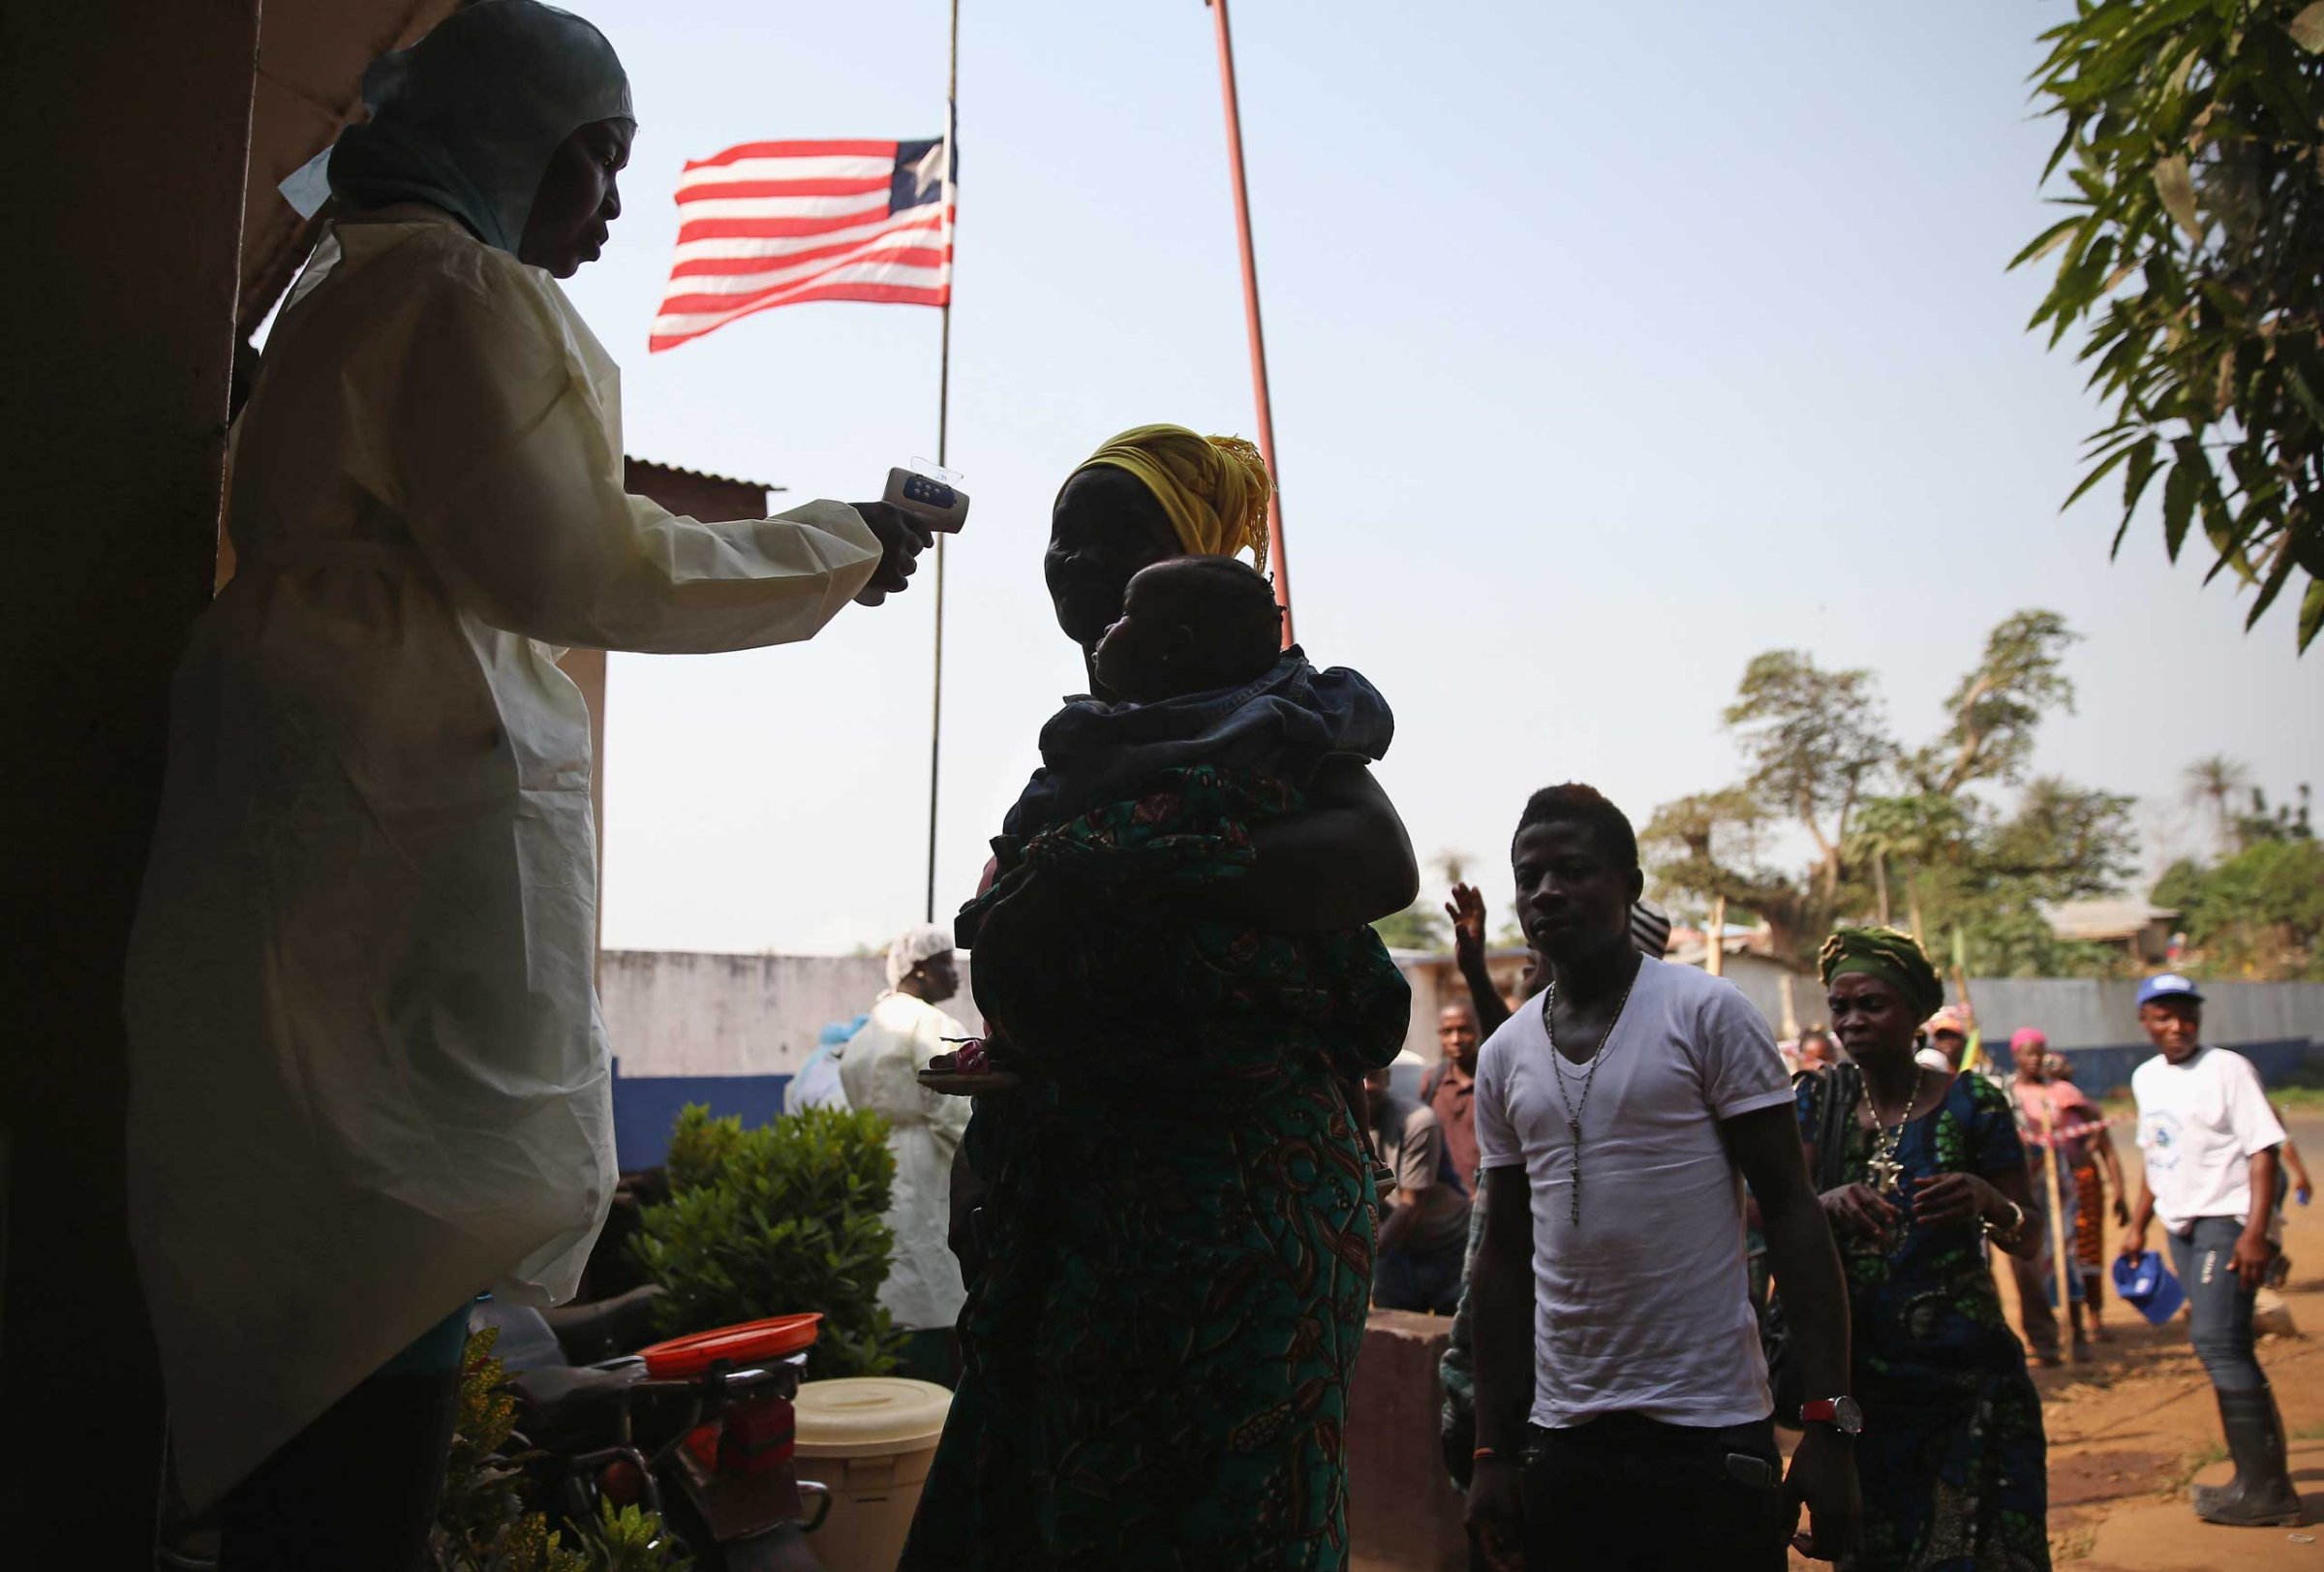 A health worker takes the temperature of a travelers at a highway checkpoint in Liberia on on Jan. 29, 2015.